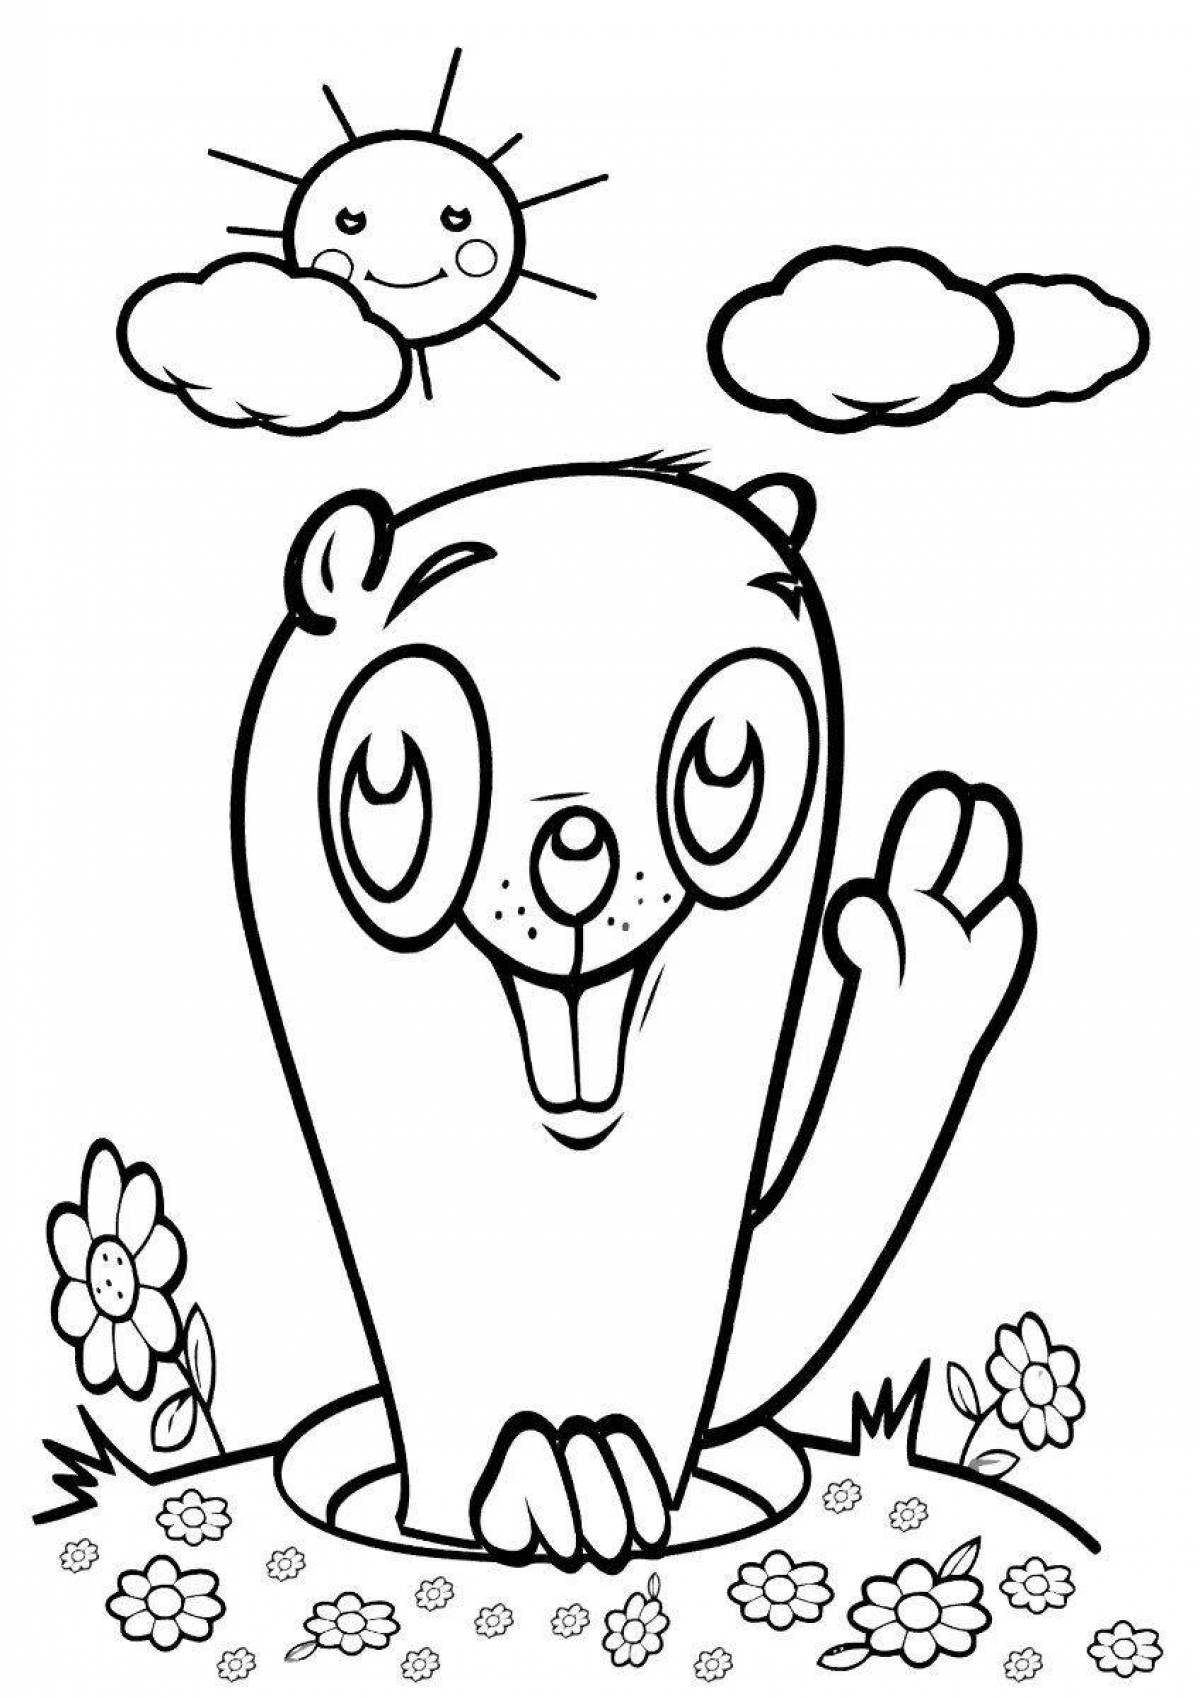 Coloring cute gopher